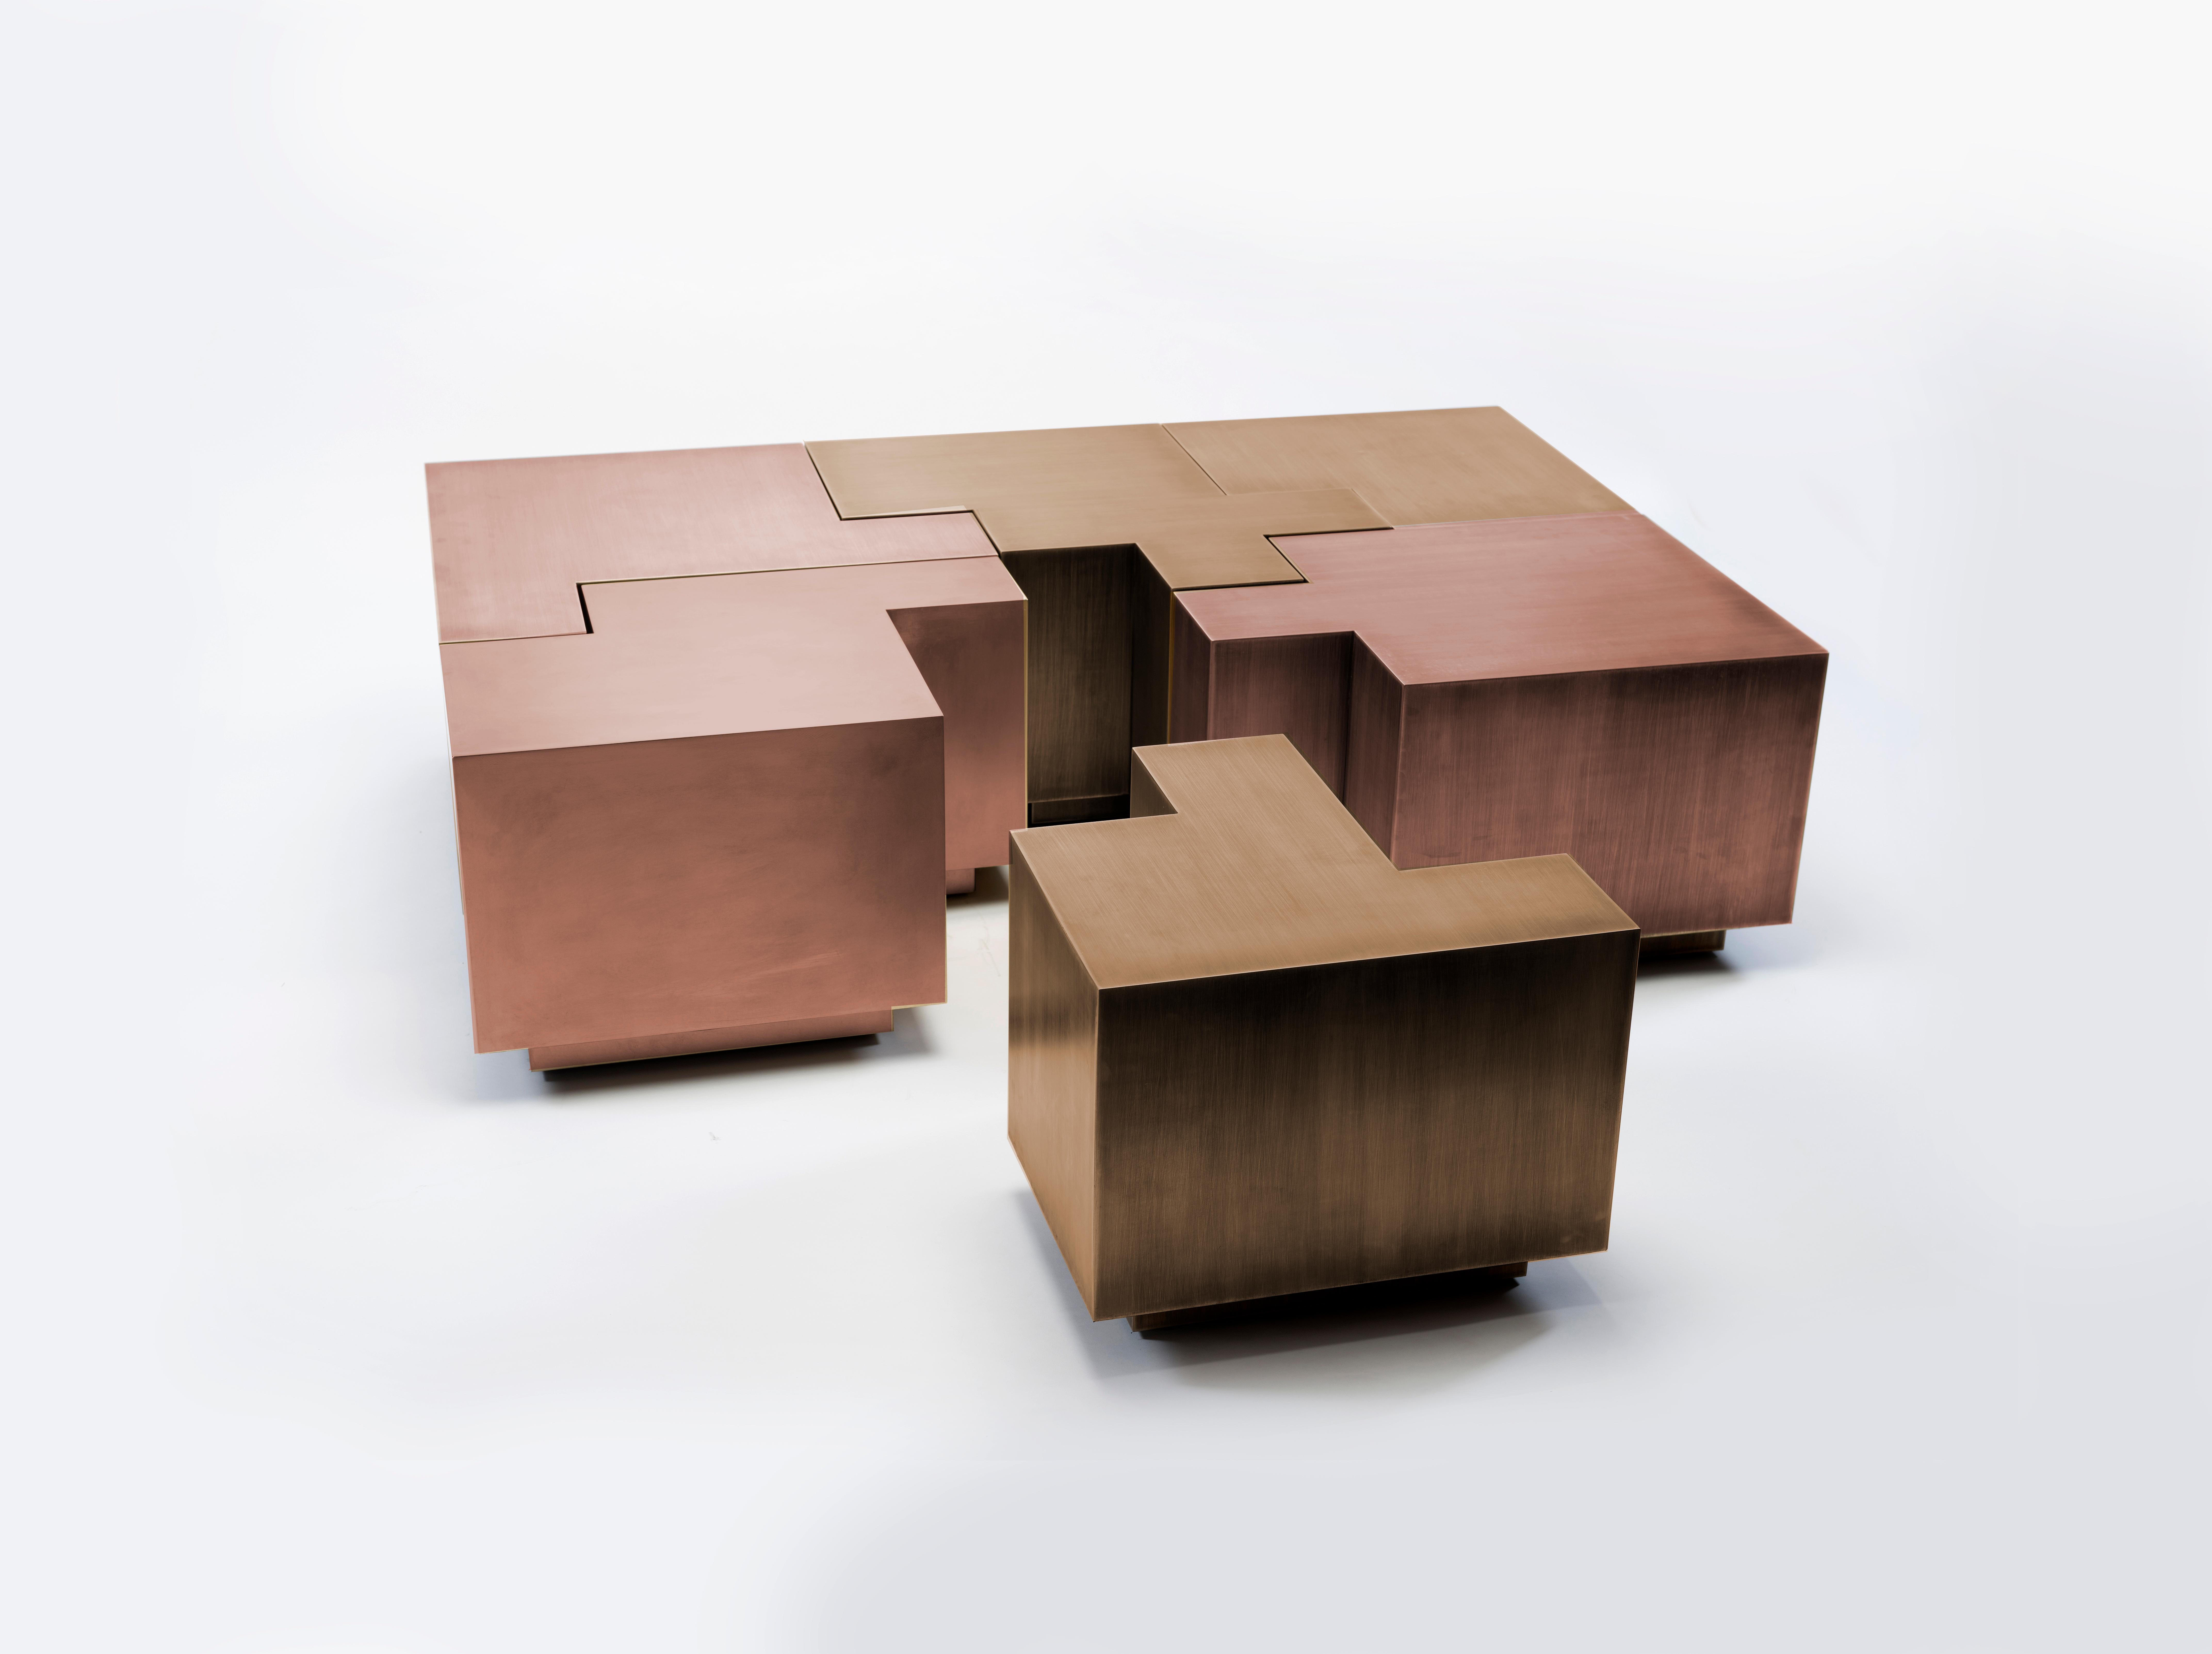 Rose and brass puzzle table, 2023
Burnished and rose brass
Measures: 36 x 54 x 14 in 
Edition of 10

Icelandic-born Gulla Jónsdóttir creates unexpected and poetic modern architecture and interior spaces
in addition to sculptural furniture